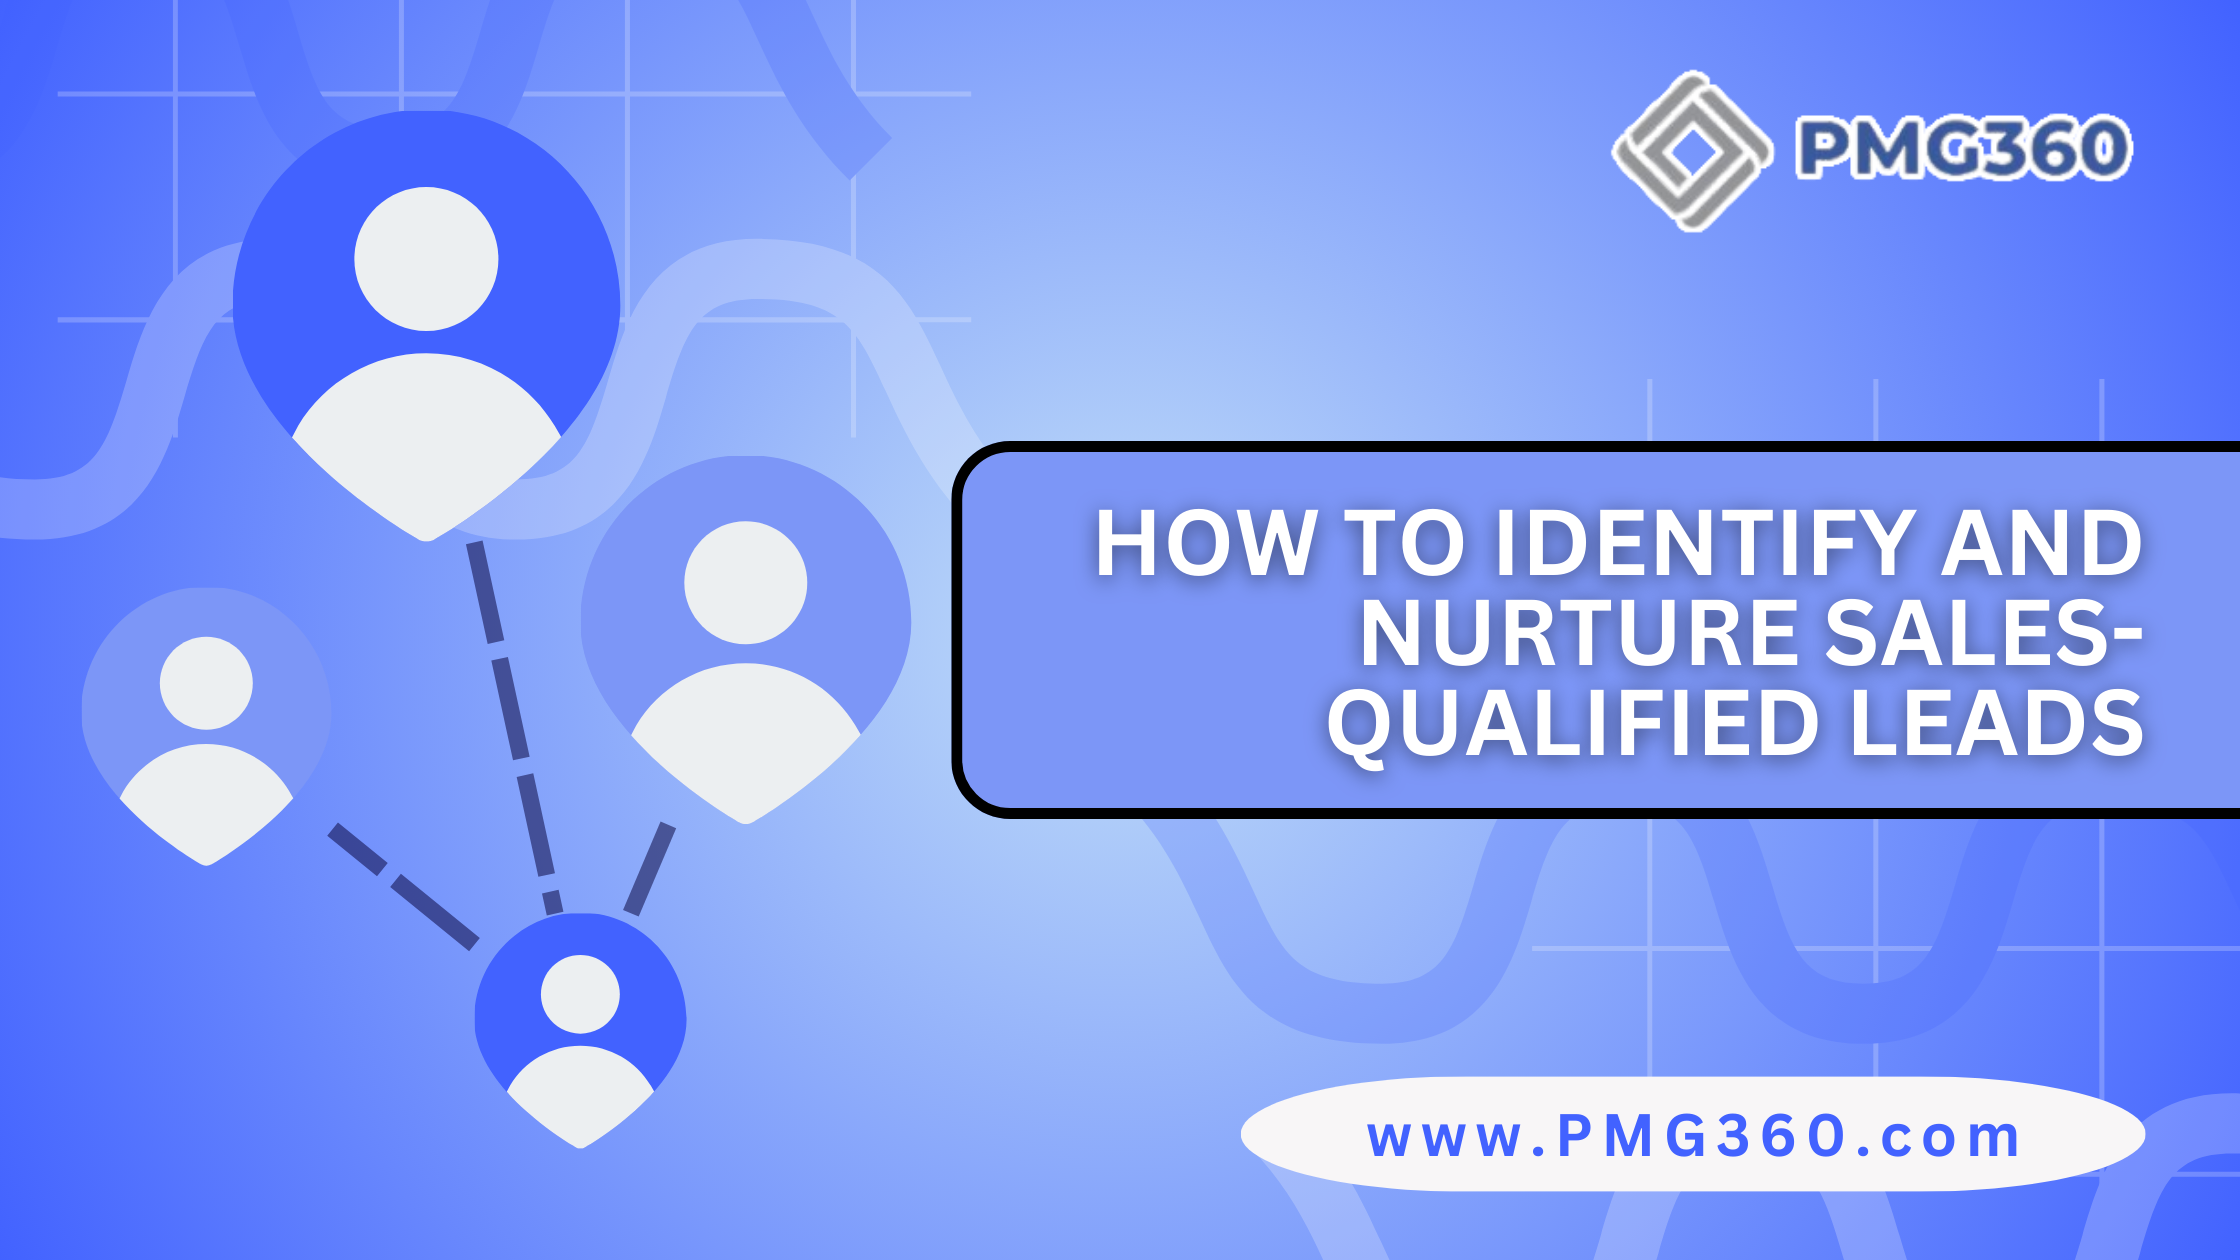 How to Identify and Nurture Sales-Qualified Leads